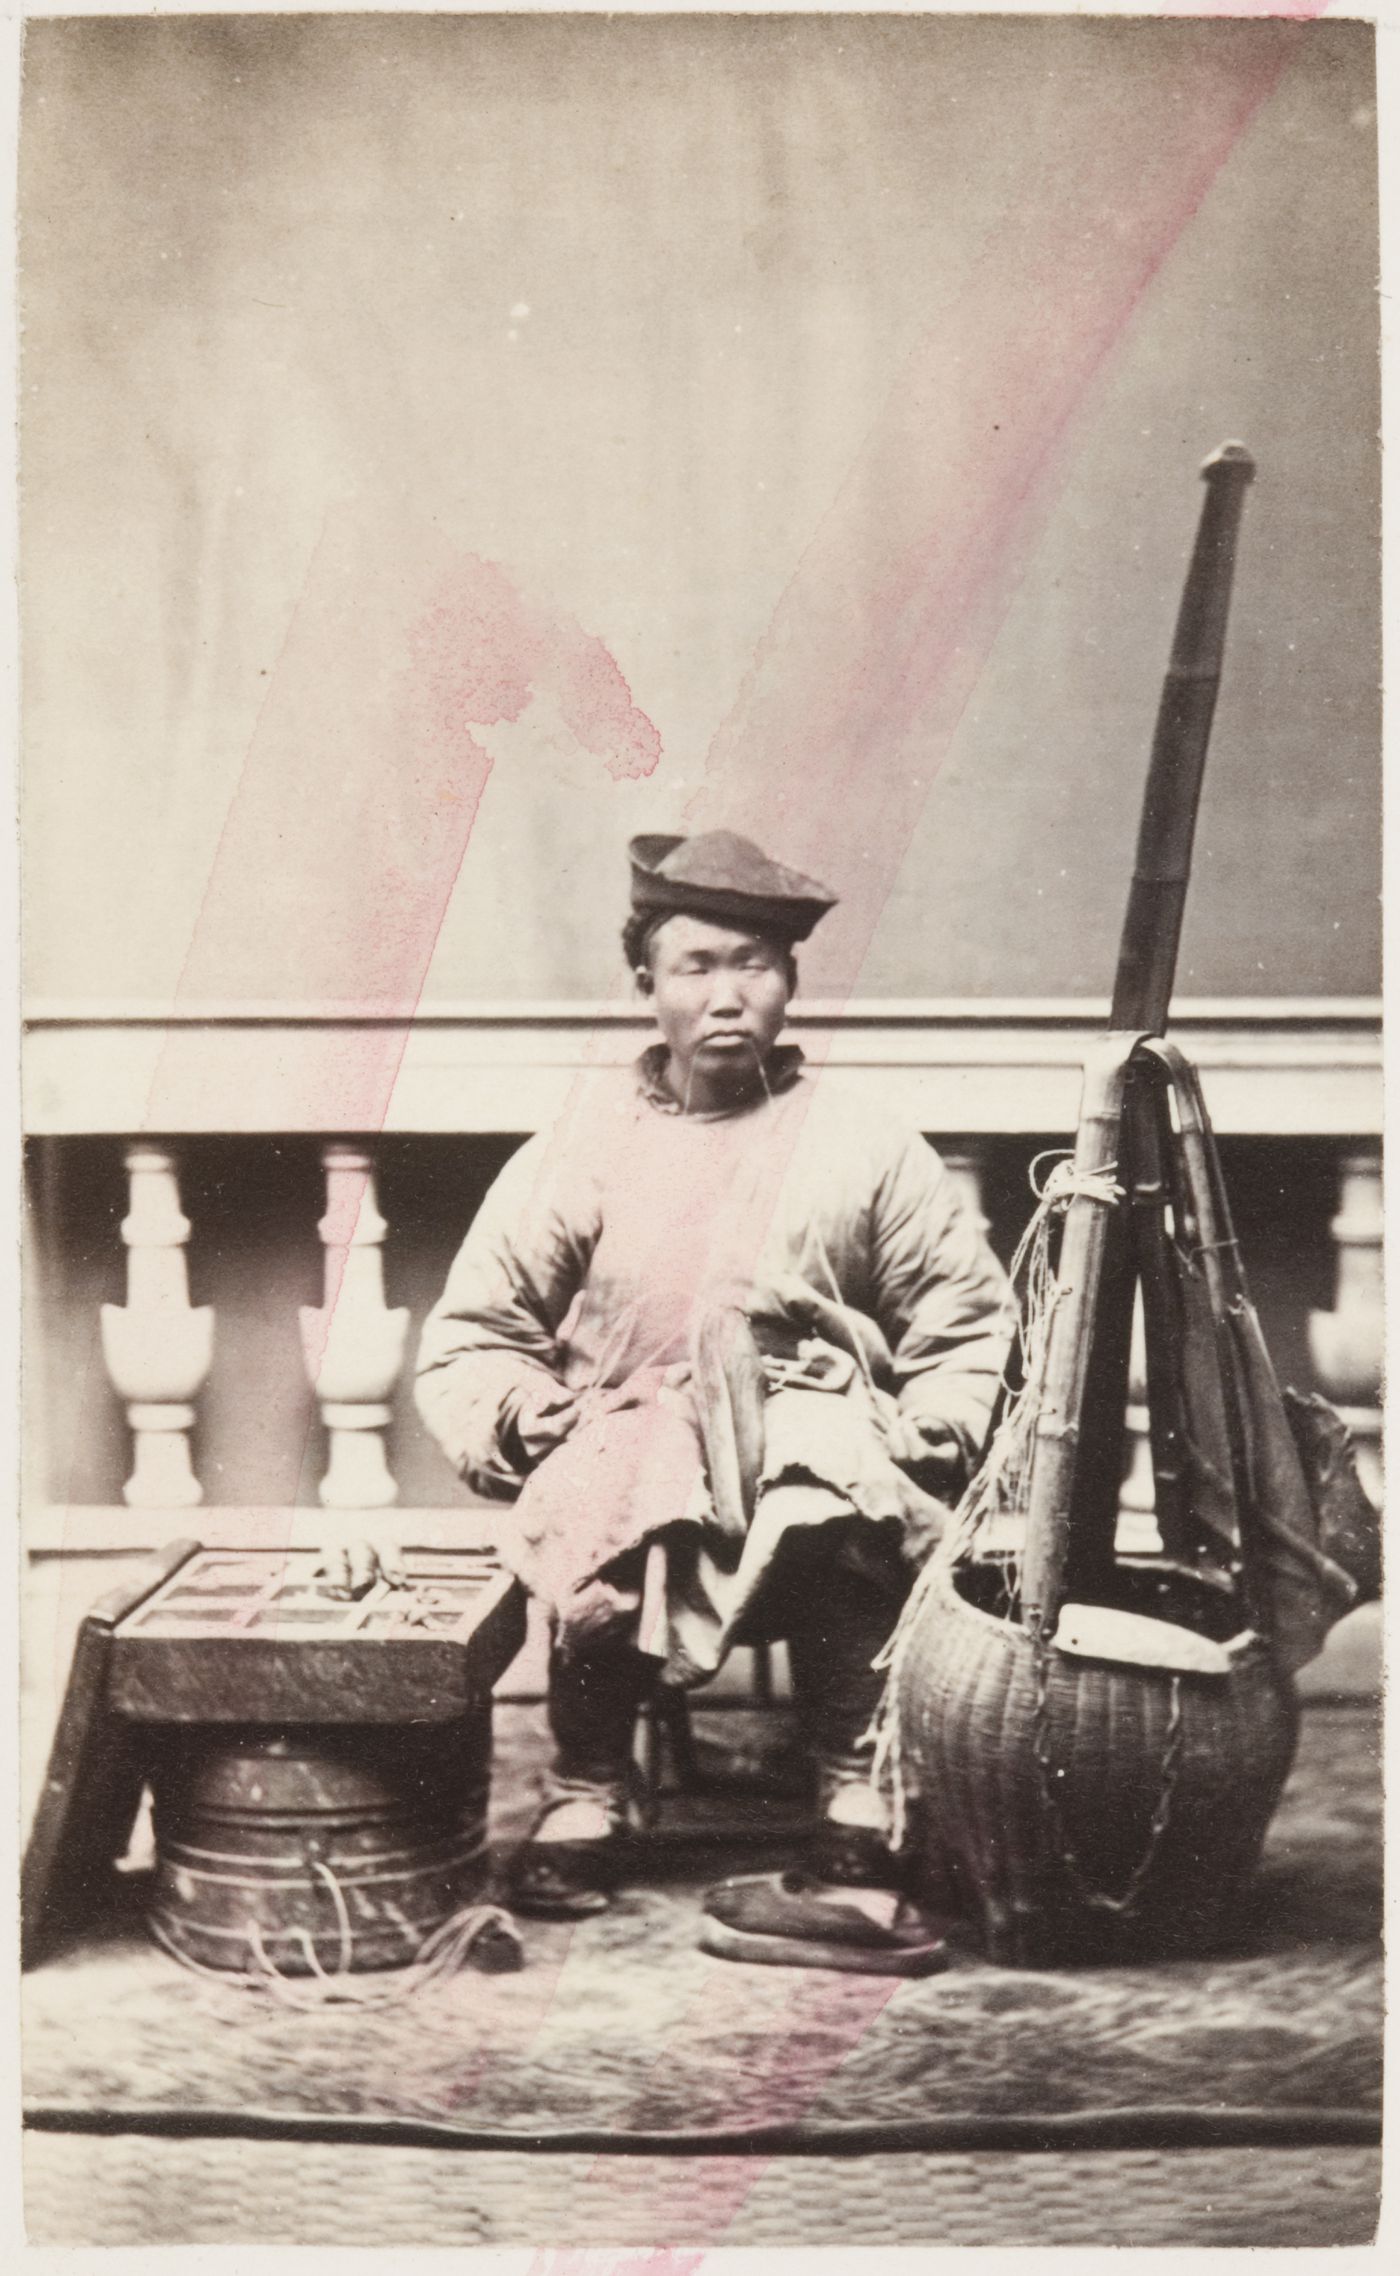 Portrait of a Chinese cobbler (peddler) repairing shoes, with his equipment beside him